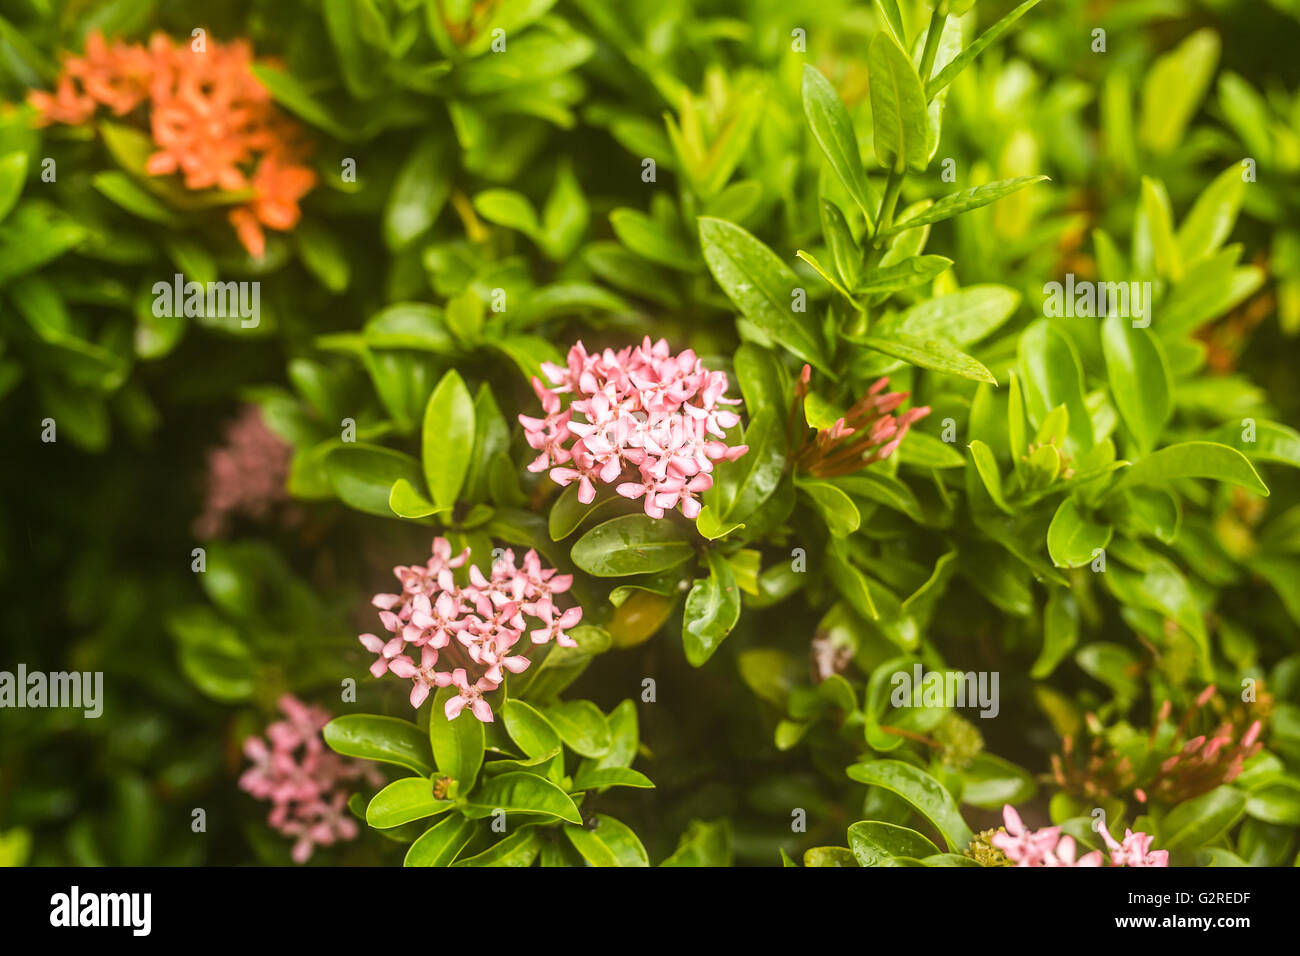 pink flowers in a garden Stock Photo